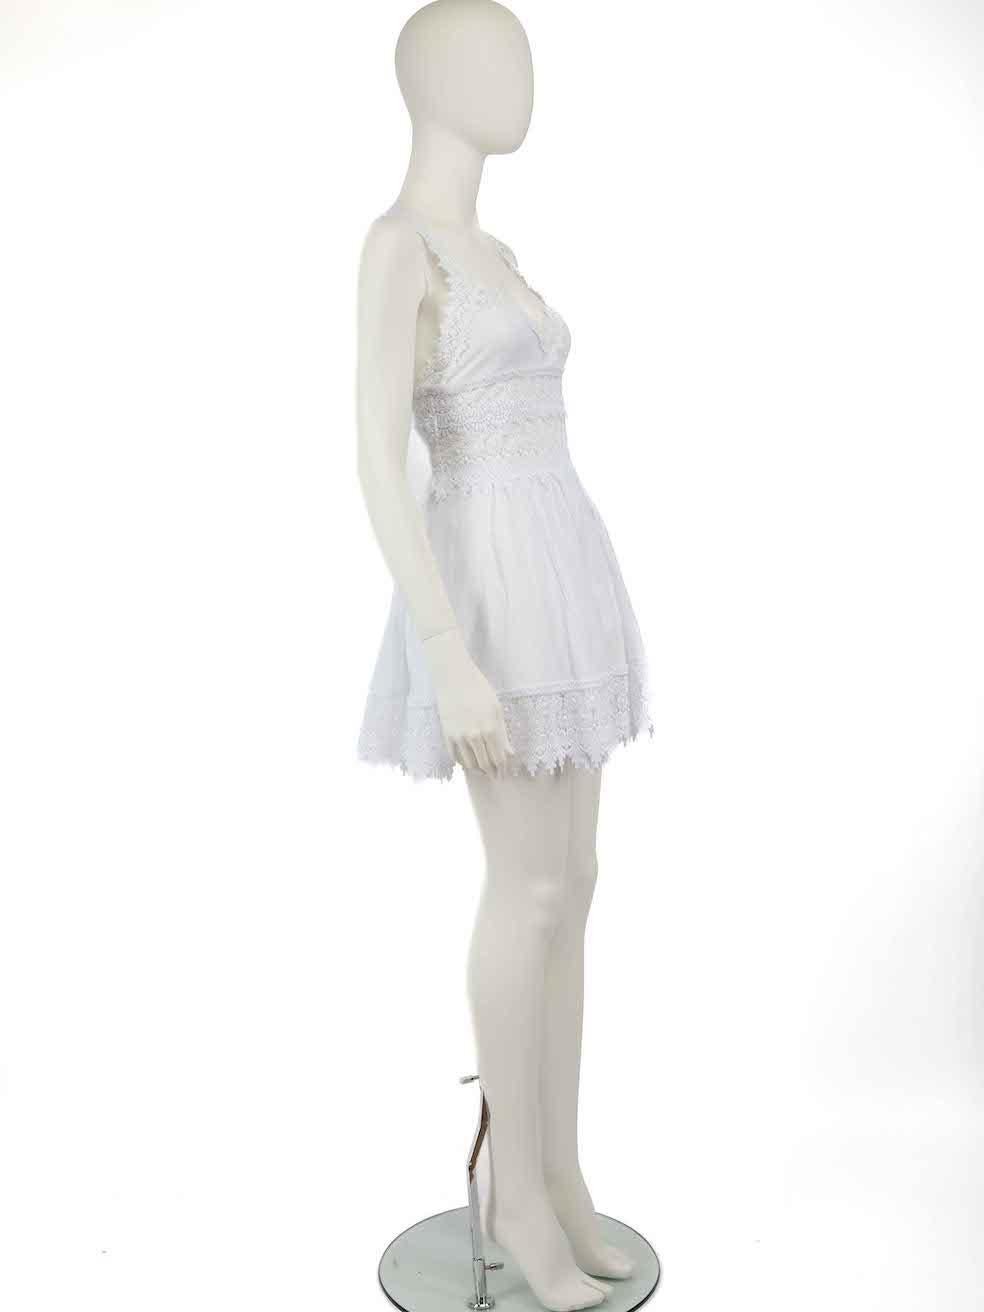 CONDITION is Very good. Hardly any visible wear to dress is evident on this used Charo Ruiz designer resale item.
 
 Details
 White
 Cotton
 Mini dress
 Sleeveless
 Floral lace trim accent
 V neckline
 See through on waist
 Elasticated back panel
 
